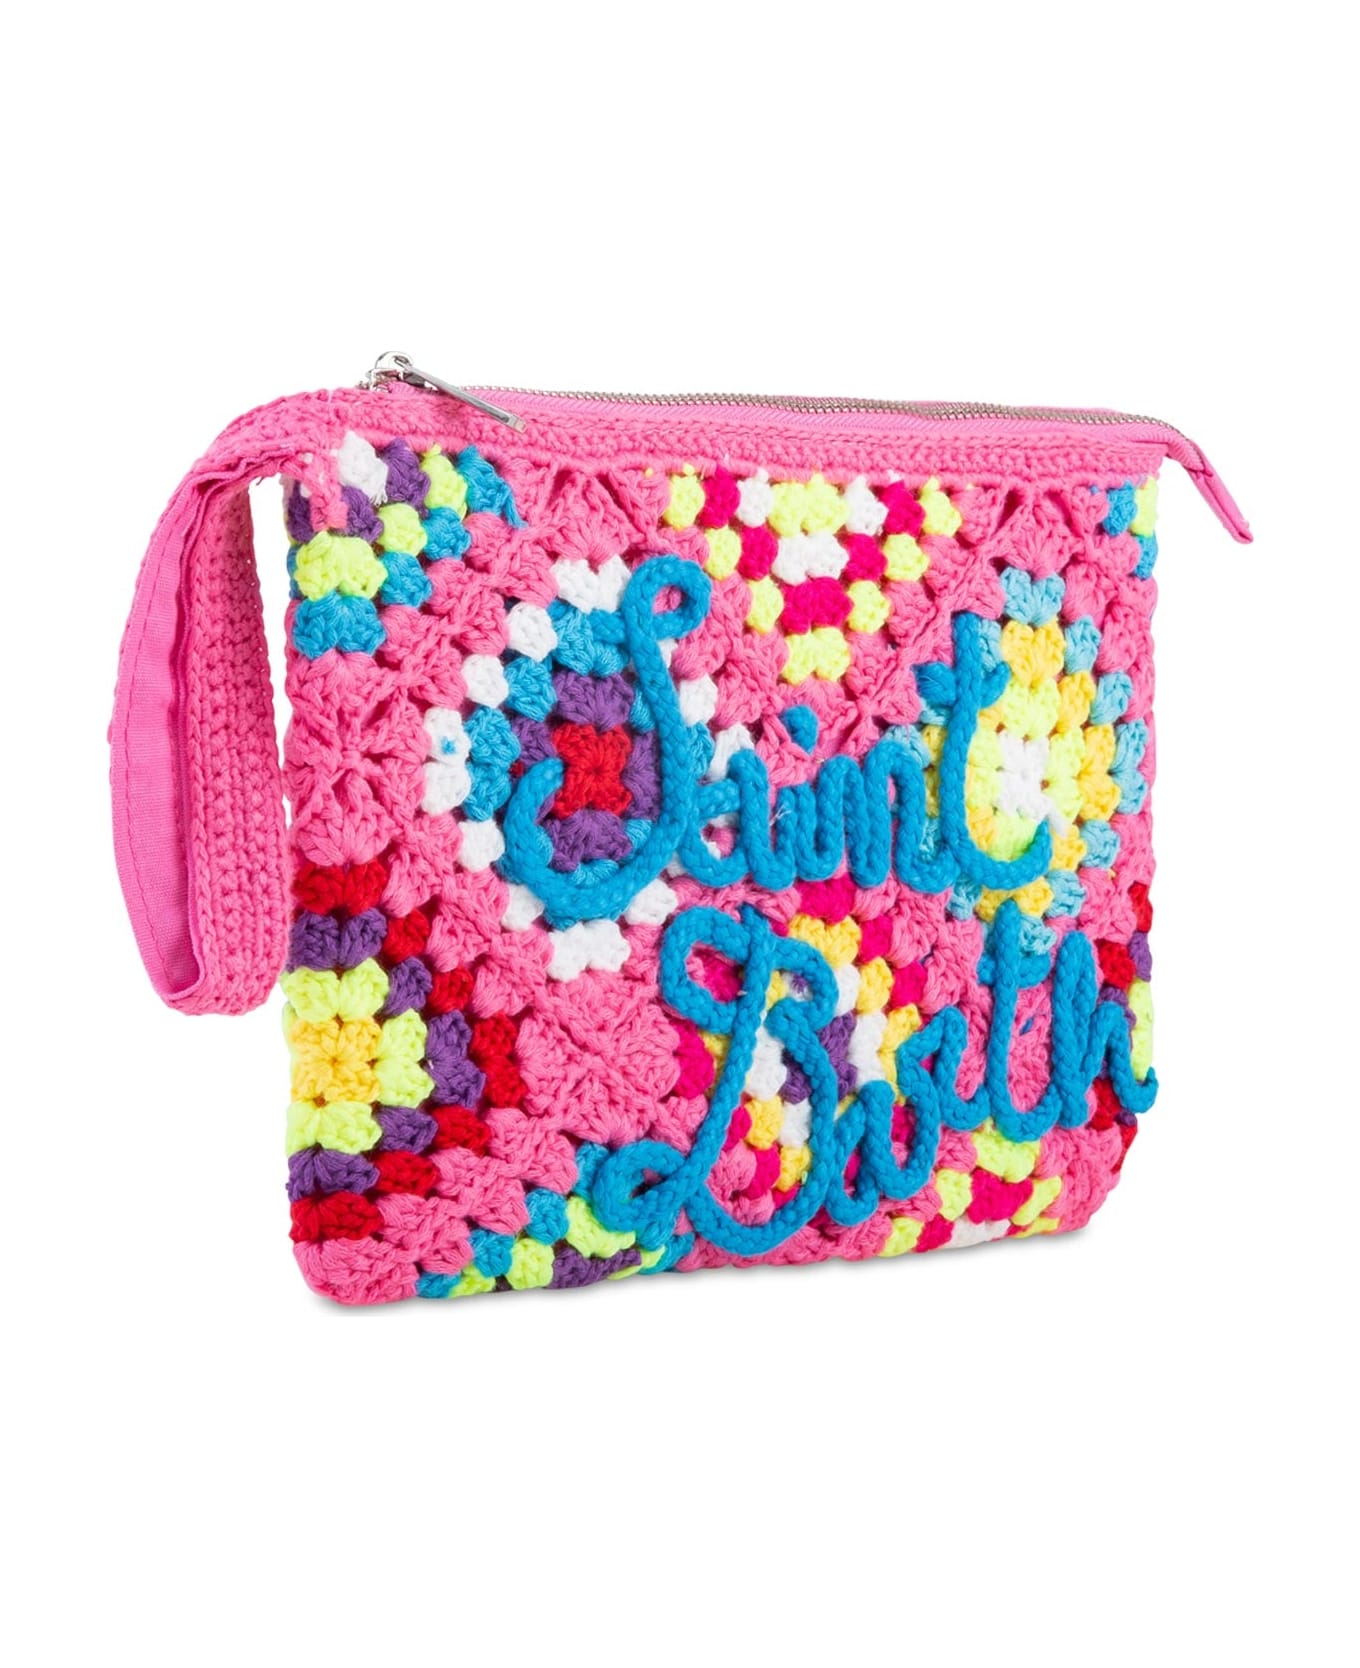 MC2 Saint Barth Parisienne Pink Crochet Pouch Bag With Saint Barth Embroidery - PINK トラベルバッグ